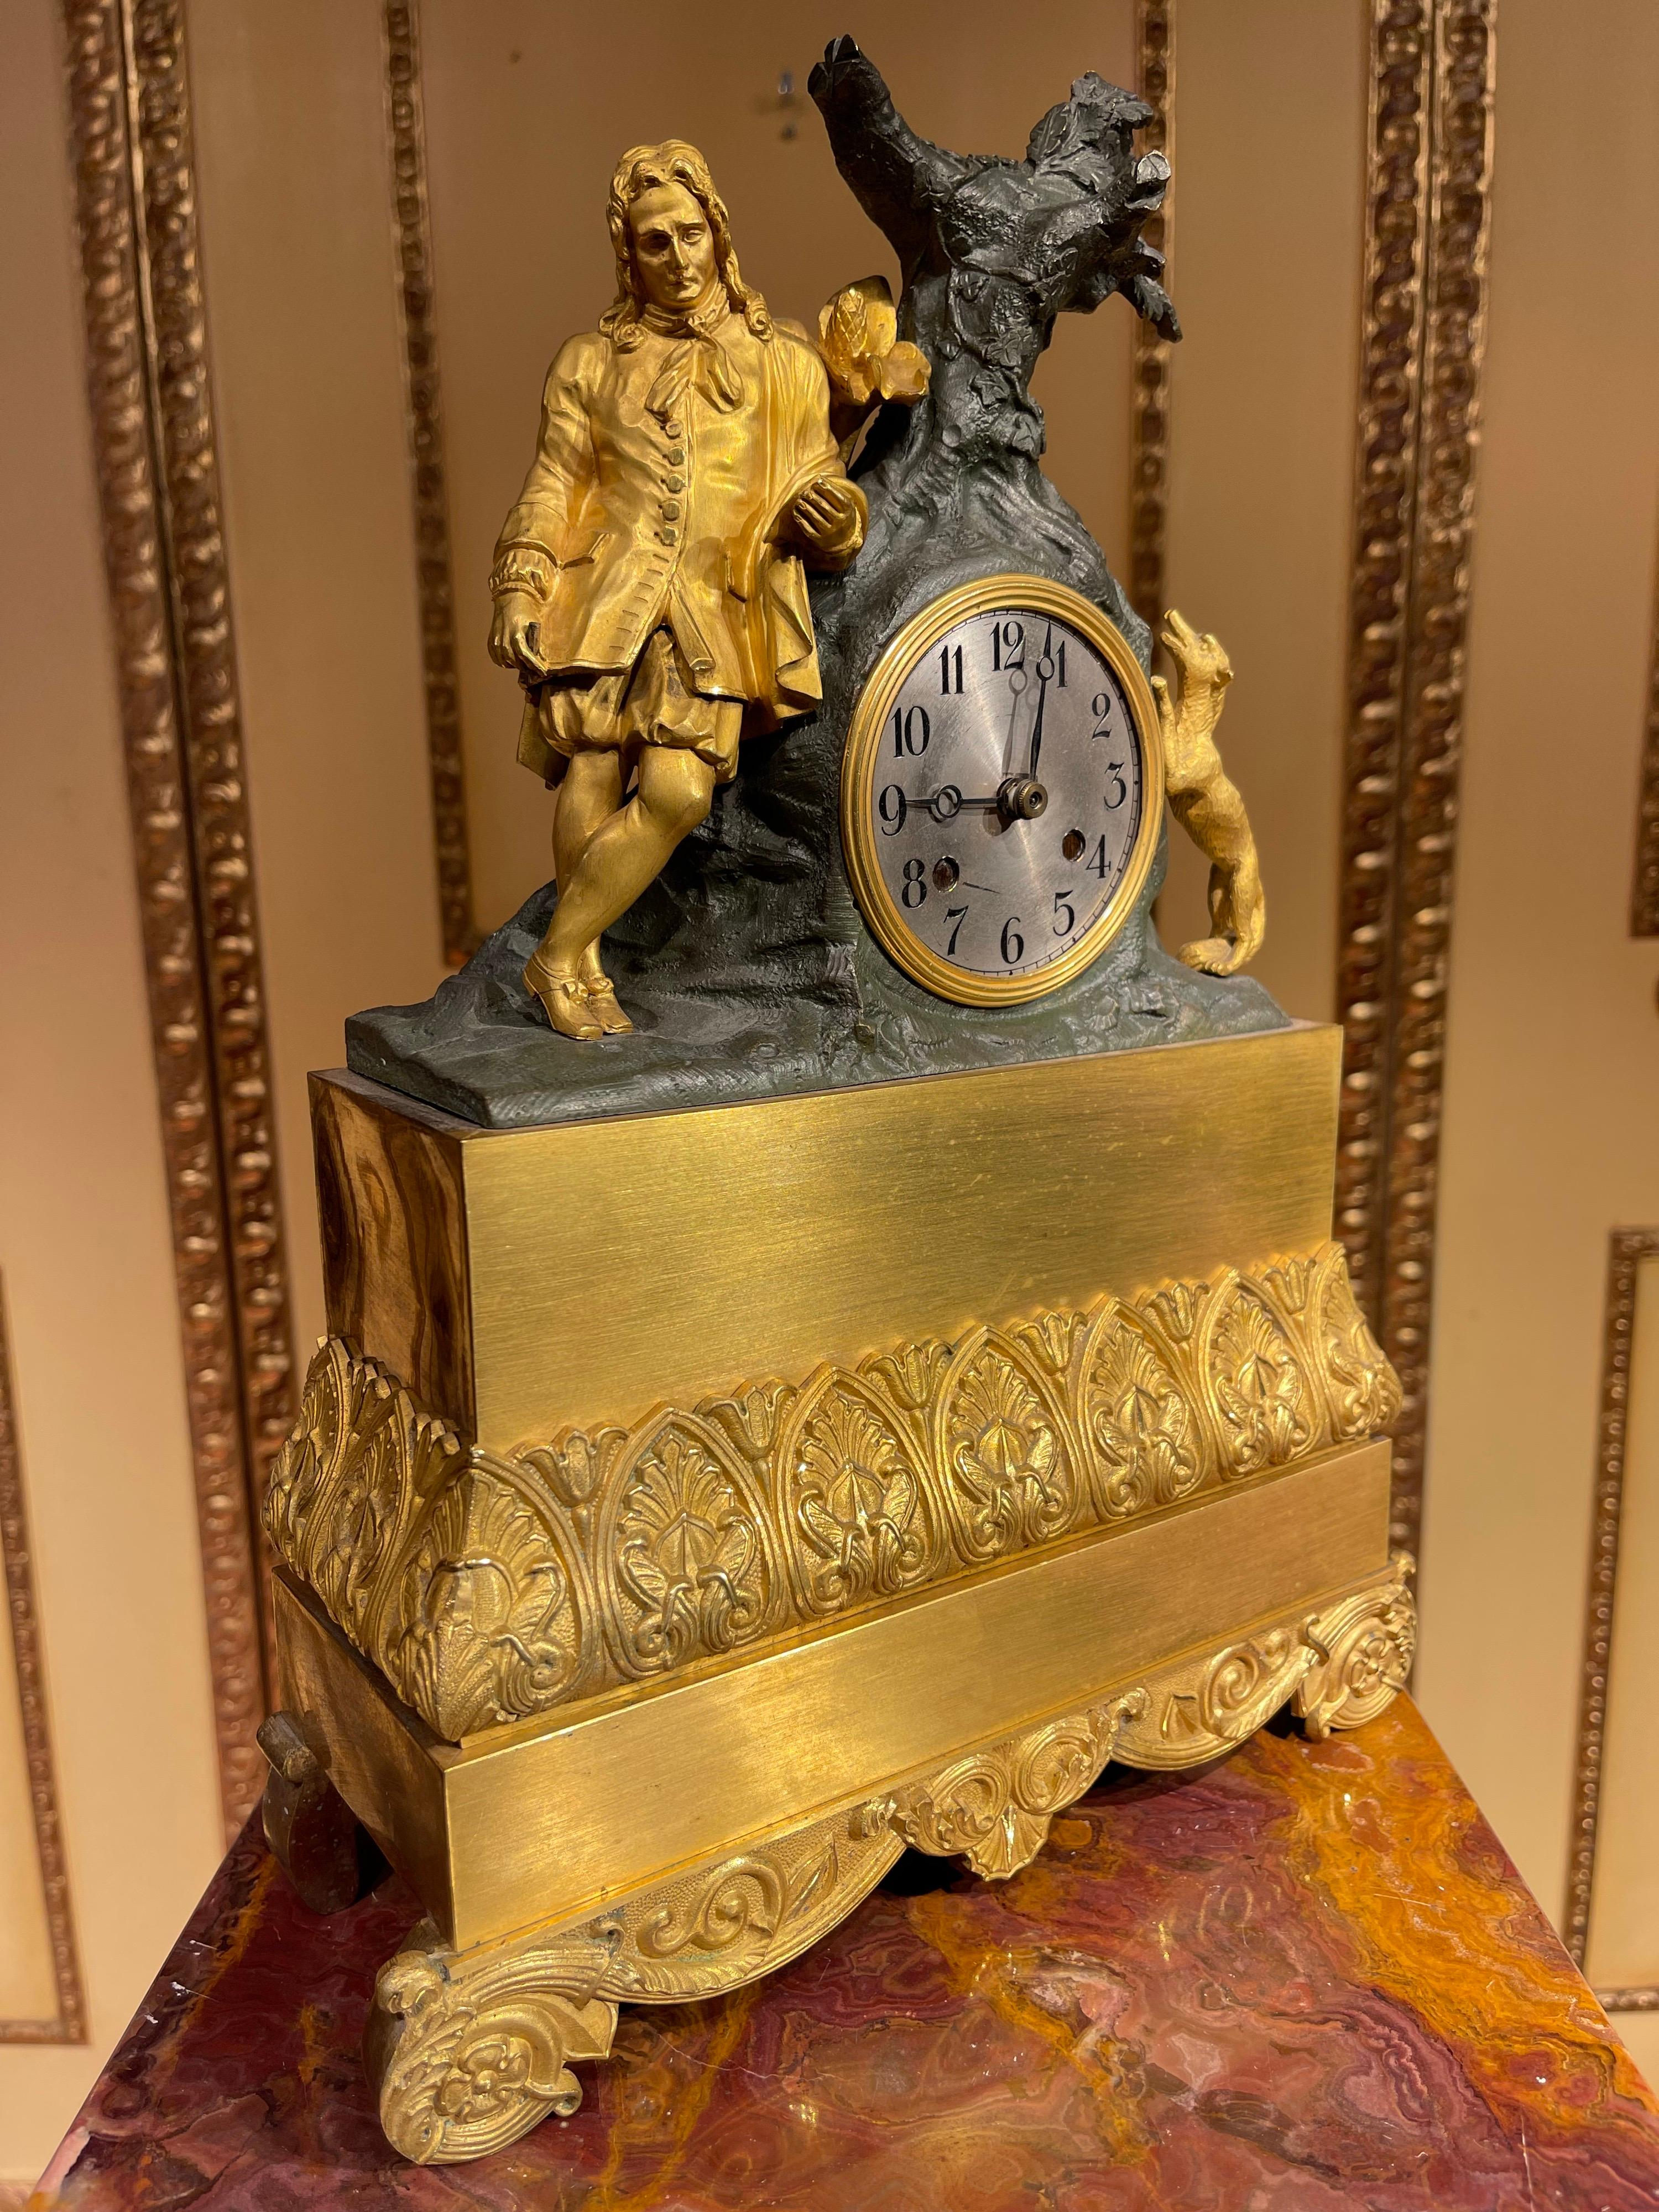 Antique mantel clock from around 1850, France, fire-gilded.

Fire-gilt and partially black-brown patinated bronze. Figurative attachment in the form of a poet leaning against a tree stump as a clock case with a letter in his left hand. Silvered